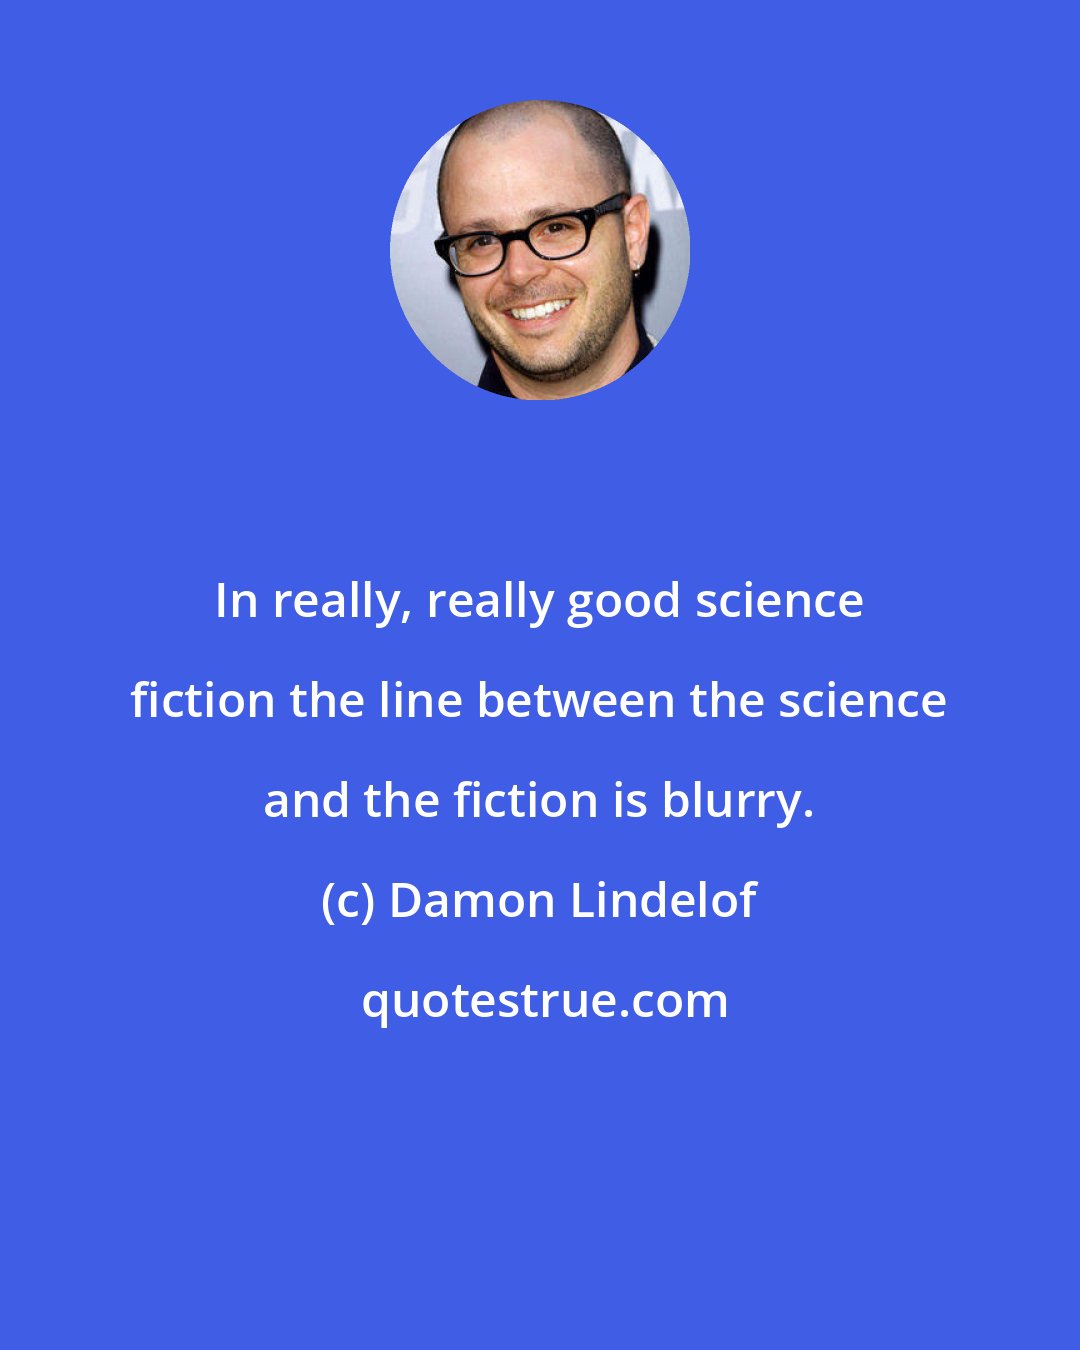 Damon Lindelof: In really, really good science fiction the line between the science and the fiction is blurry.